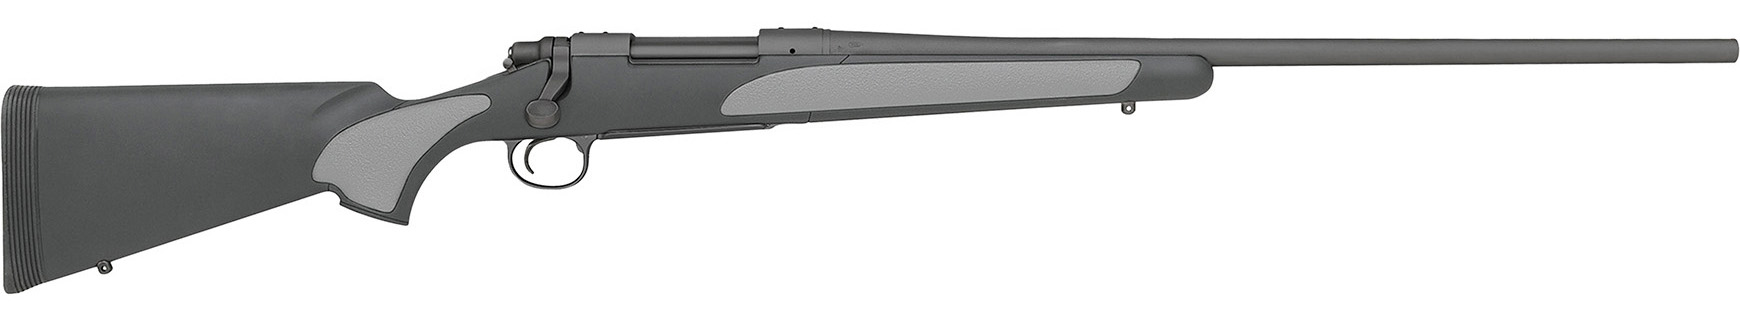 Model 700 SPS (Special Purpose Synthetic)